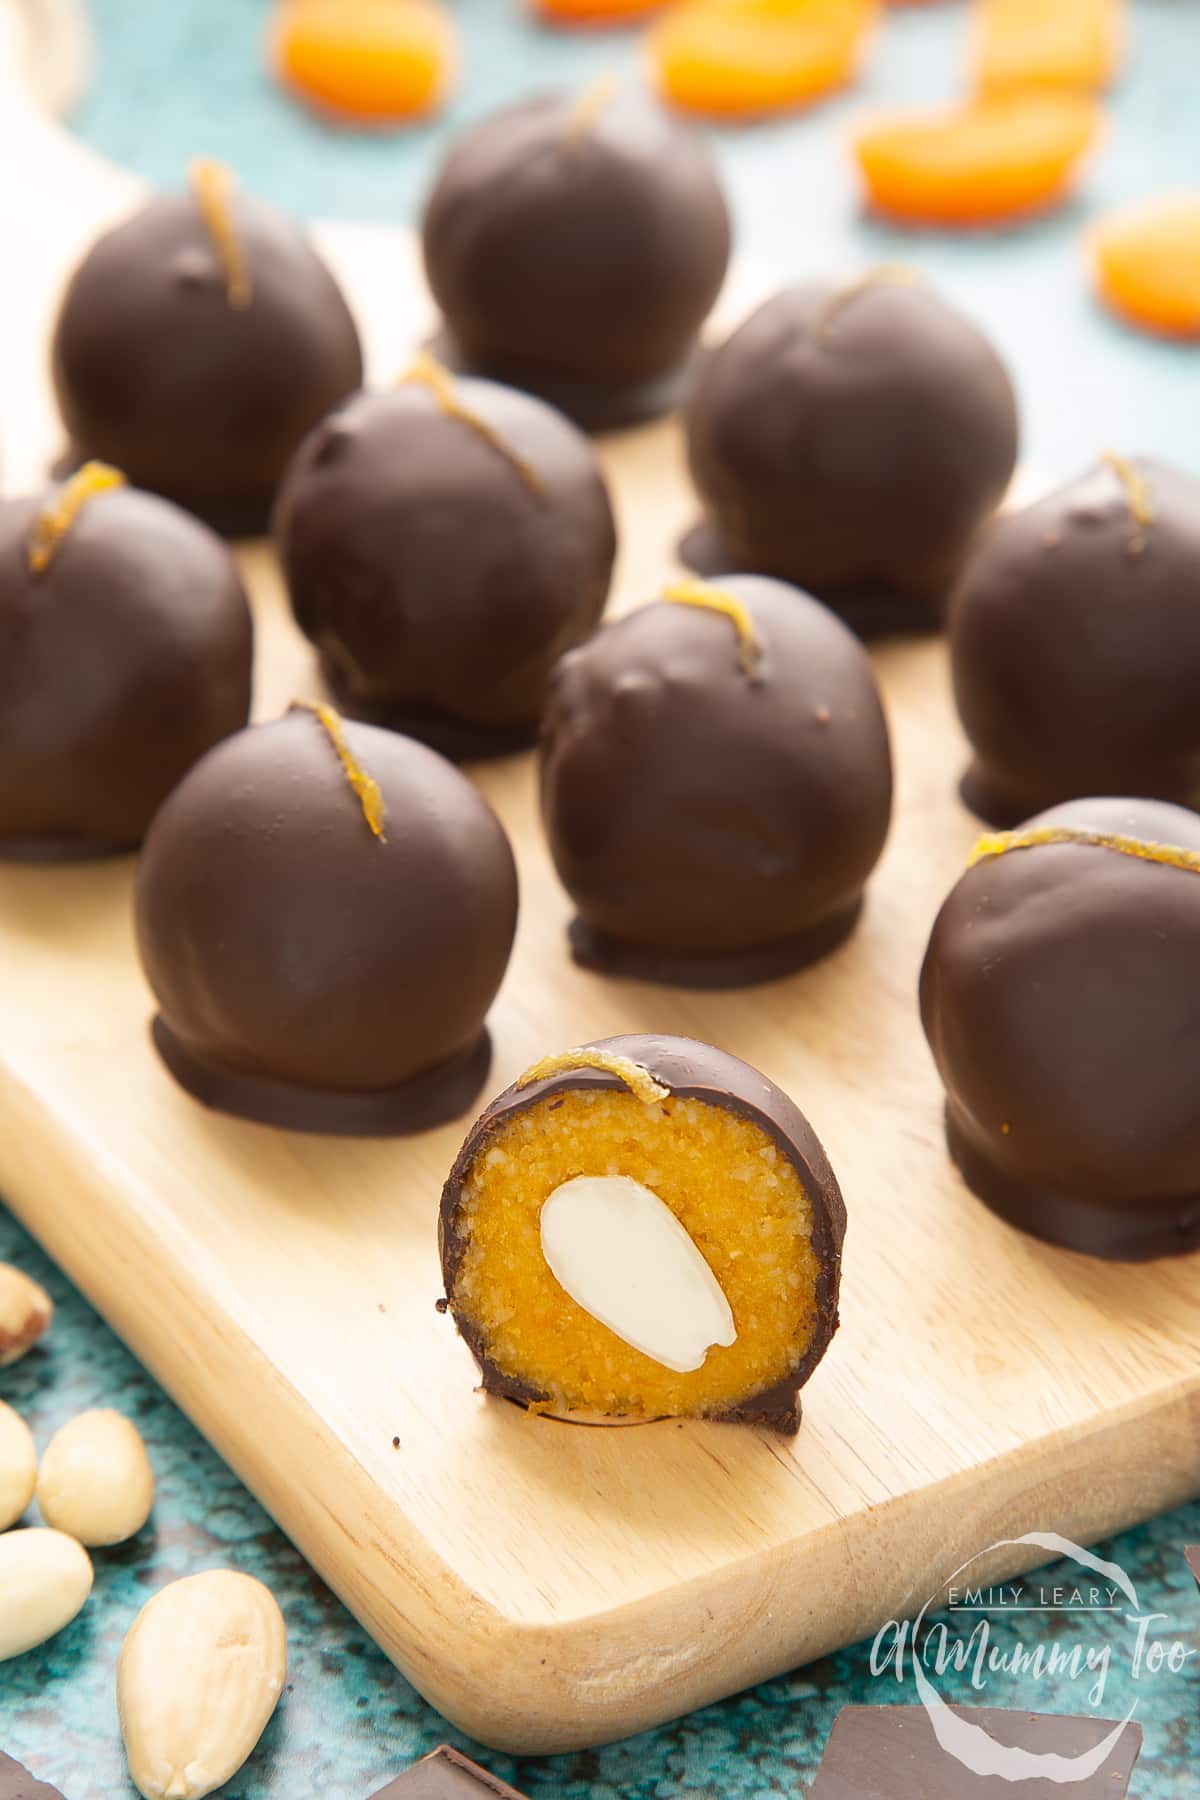 Chocolate apricot balls arranged on a wooden board. In the foreground sits half a ball, revealing the bright orange filling. An almond half sits in the centre of the filling.